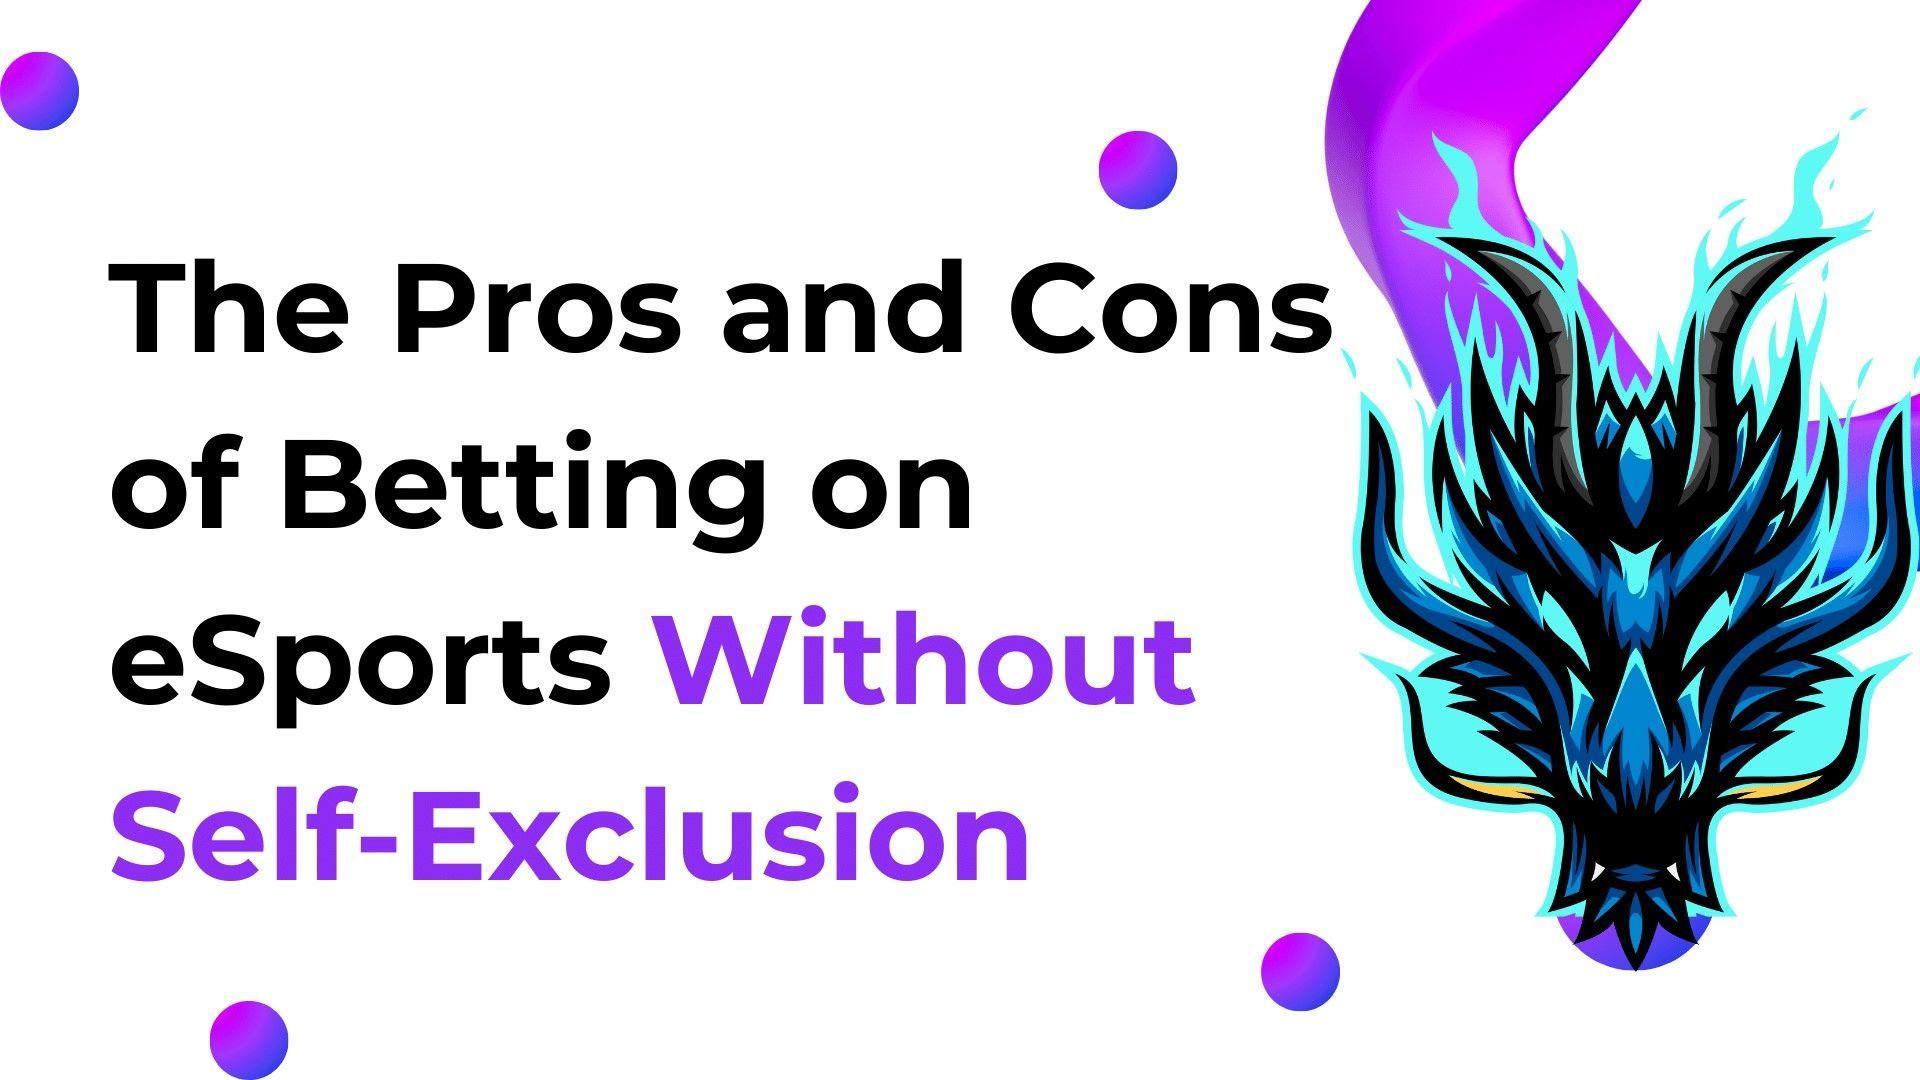 The Pros and Cons of Betting on eSports Without Self-Exclusion